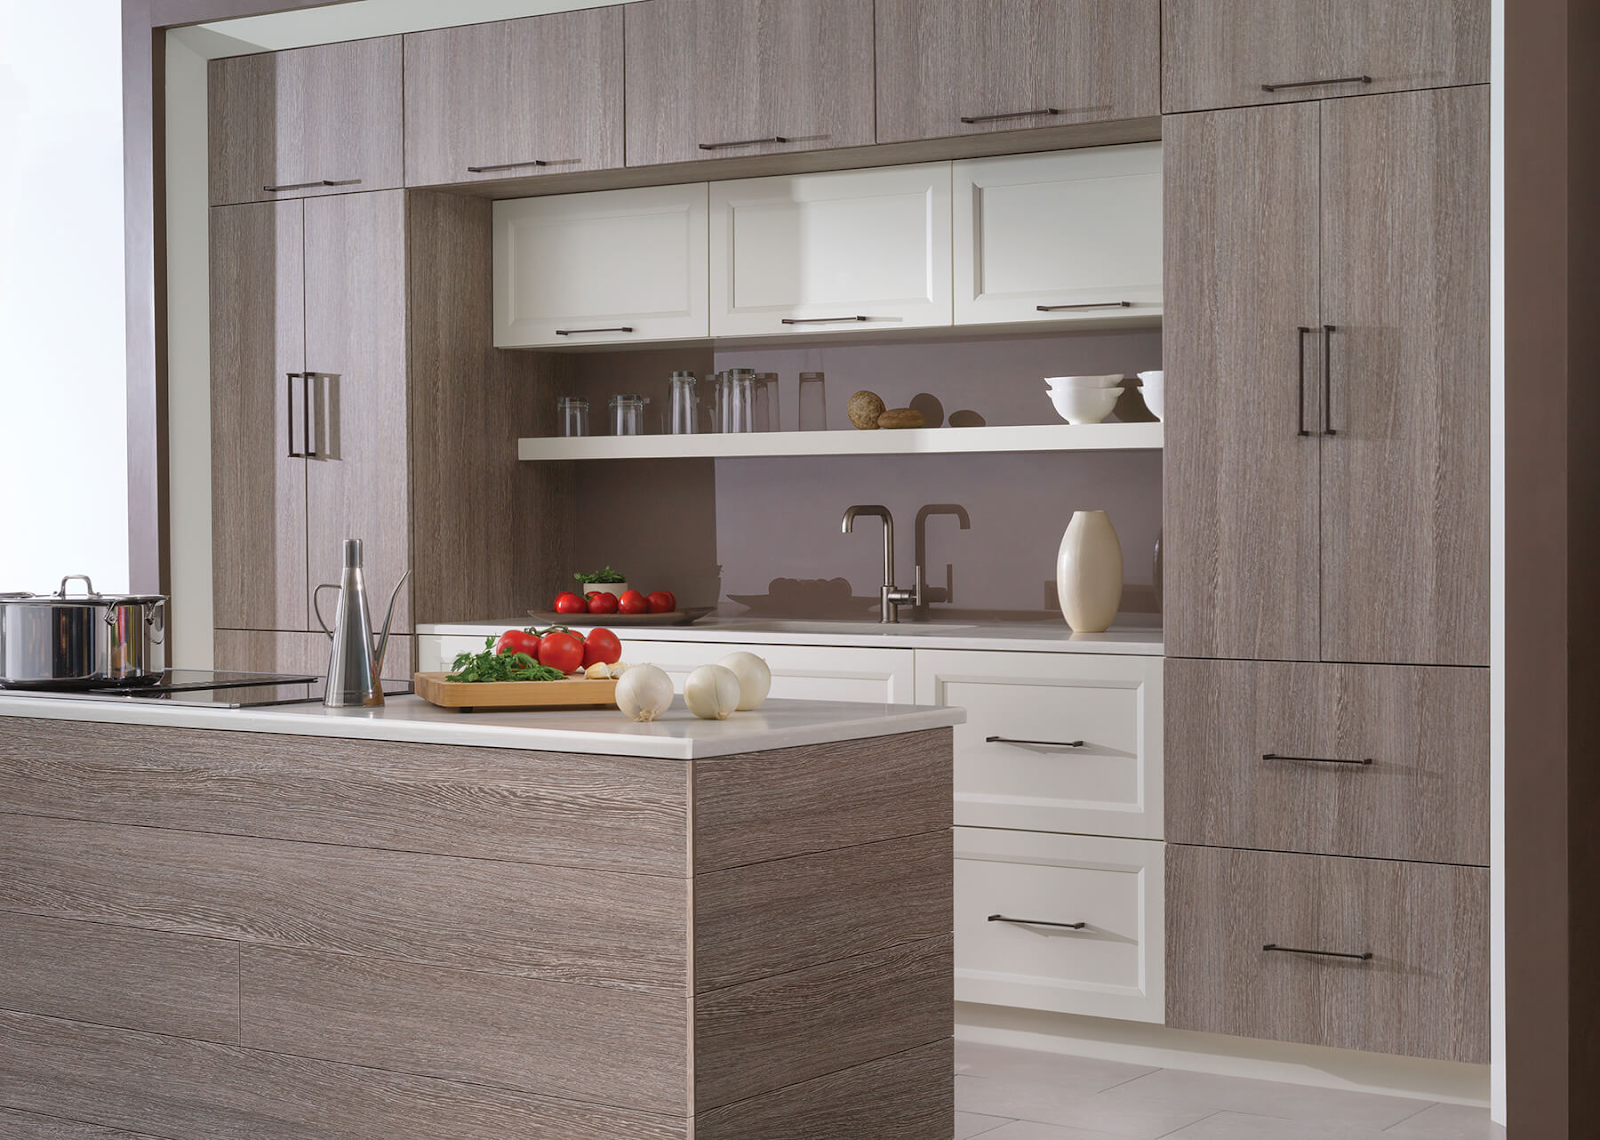 Remodeled kitchen Cabinets in Vancouver